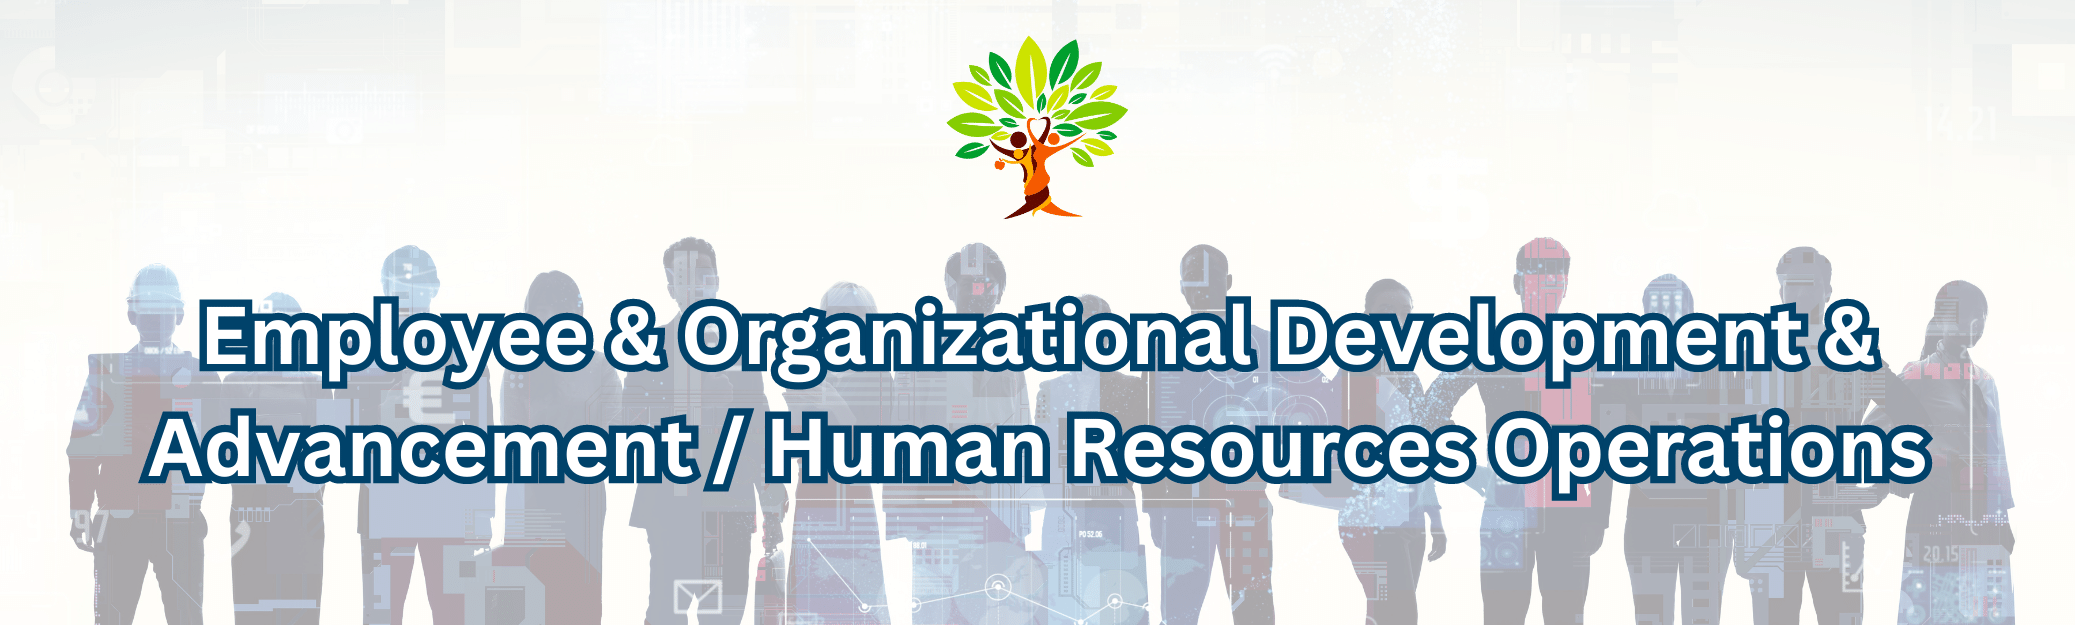 Employee and Organizational Development and Advancement/Human Resources Operations (EODA/HR Ops) banner across